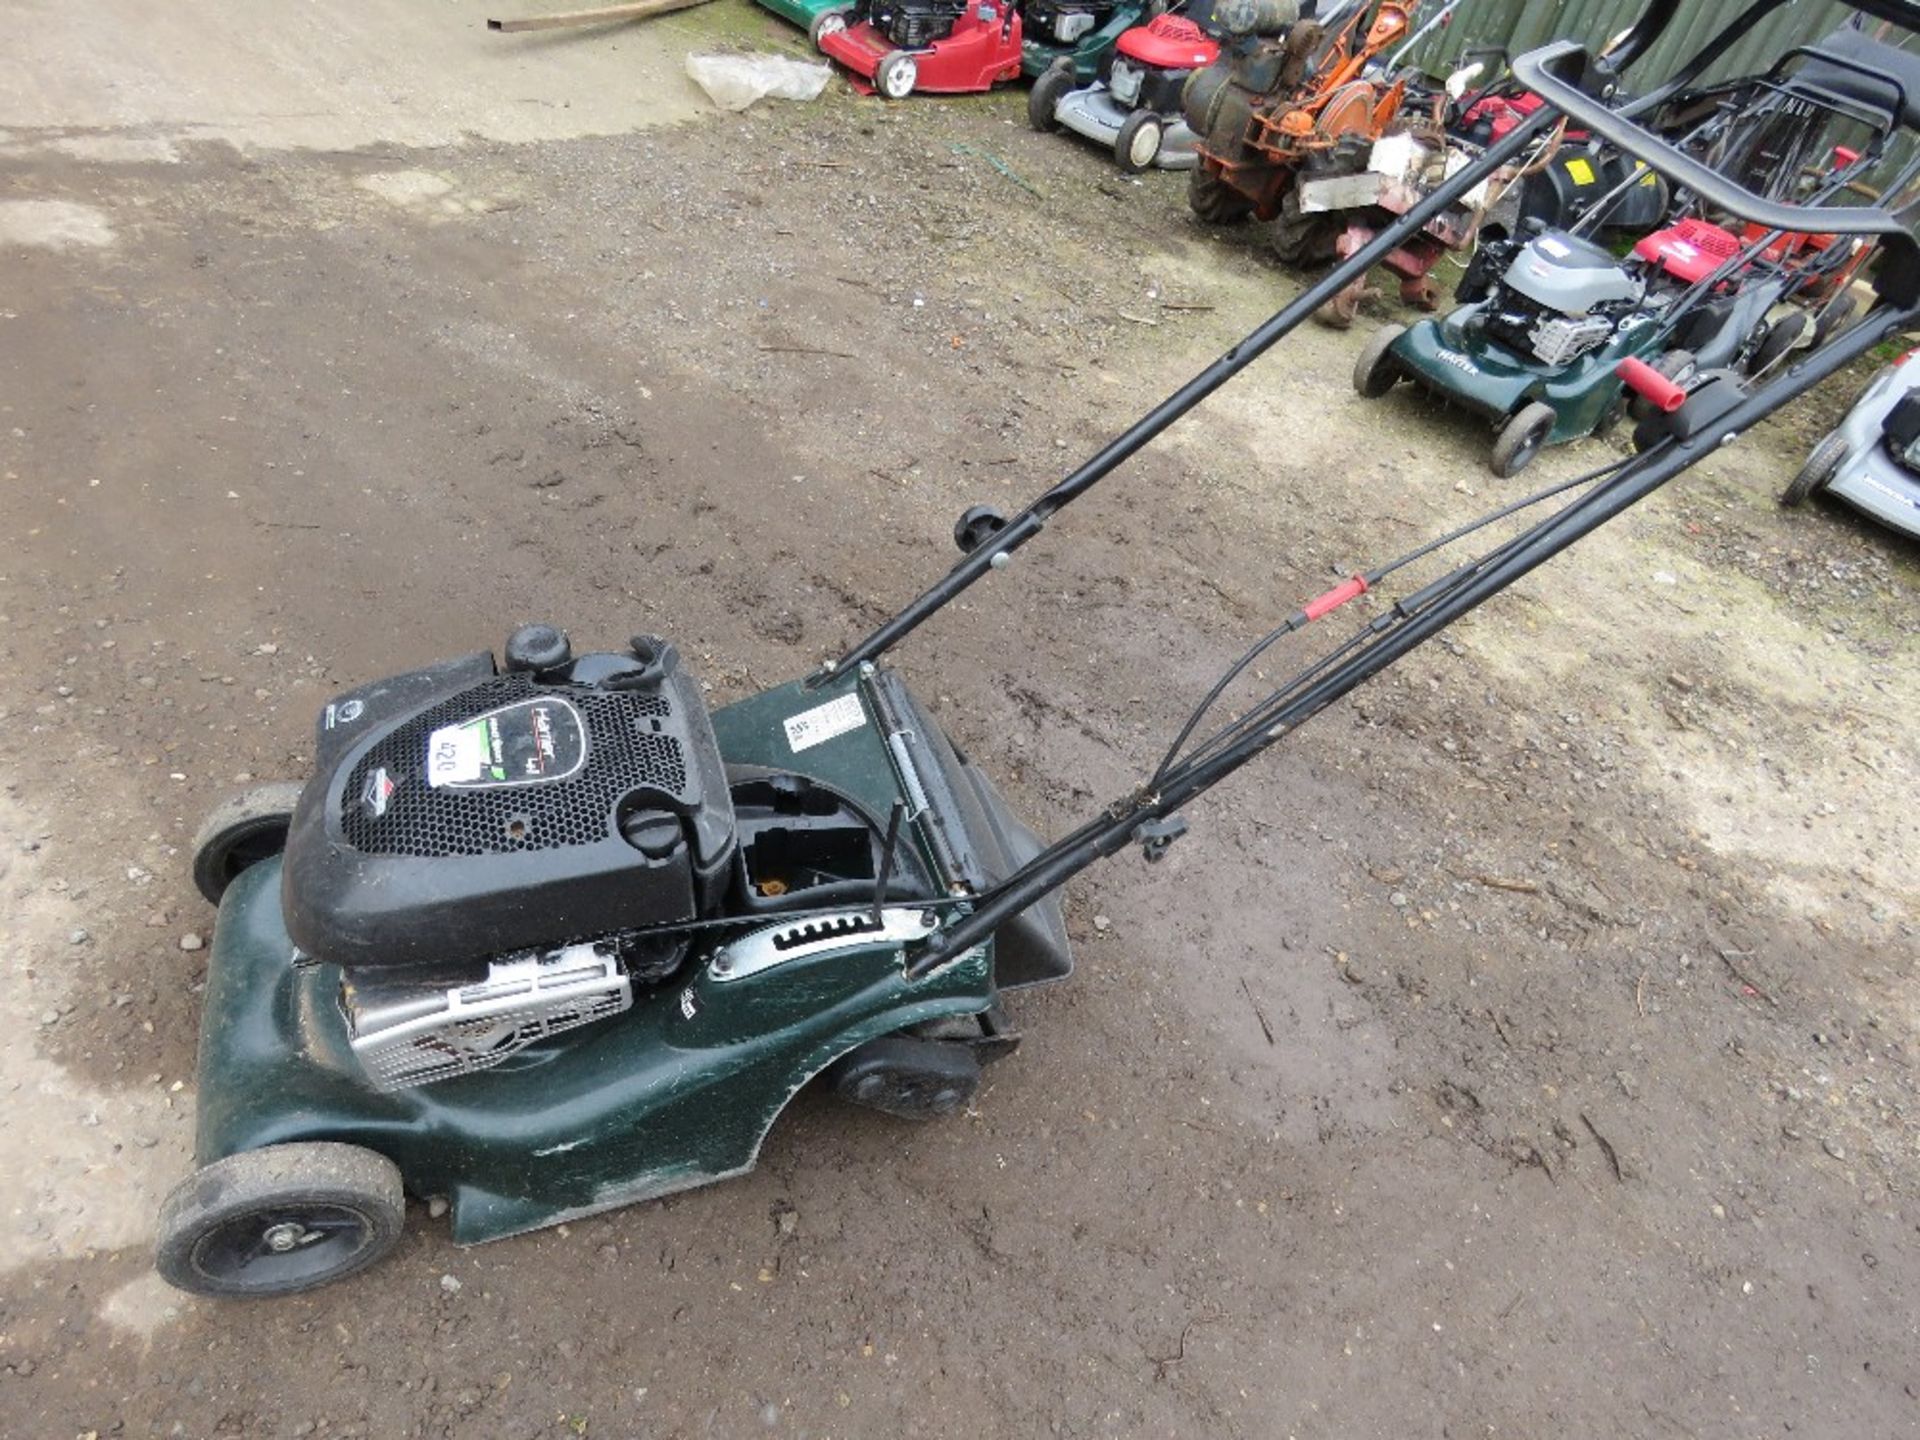 HAYTER HARRIER 41 PETROL ENGINE ROLLER MOWER, NO COLLECTOR.....THIS LOT IS SOLD UNDER THE AUCTIONEER - Image 2 of 4